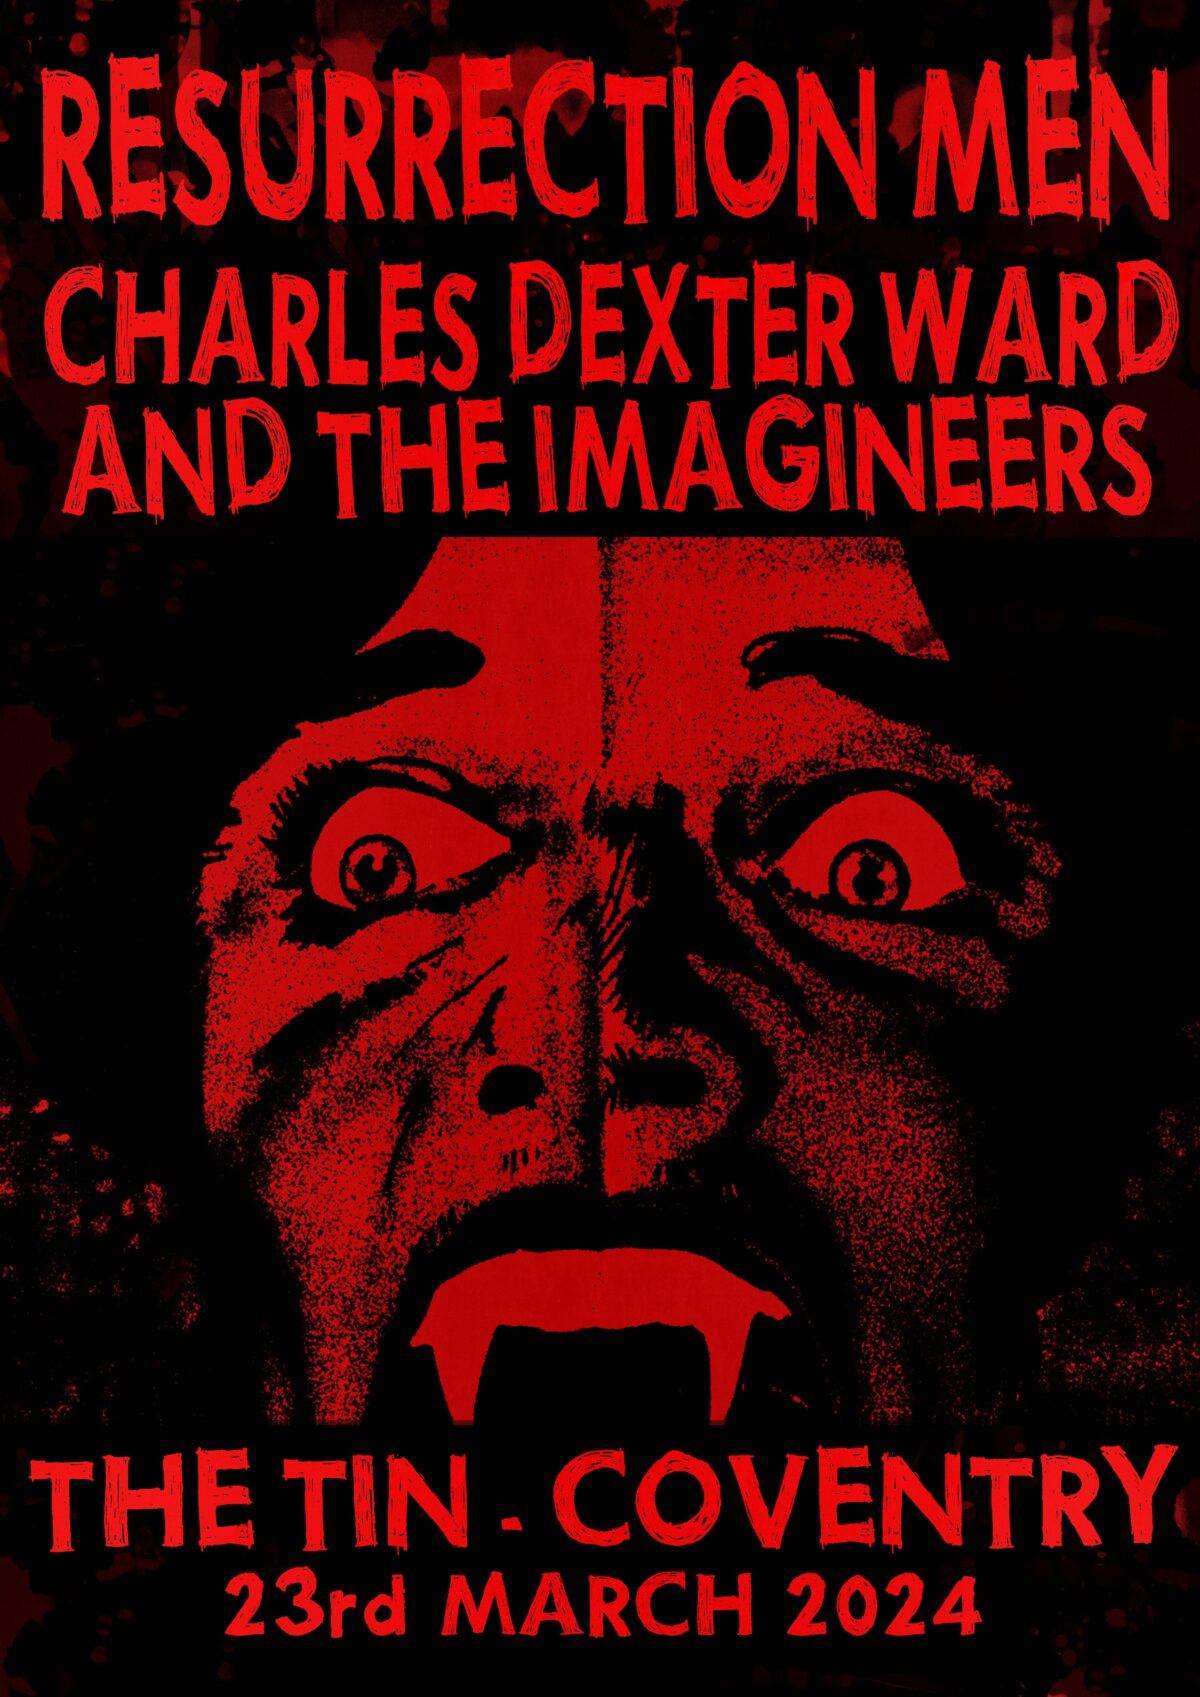 Poster for Resurrection Men and Charles Dexter Ward and the Imagineers on Saturday 23rd March 2024. Image is of a wide-eyed vampire through a dark-fed filter.